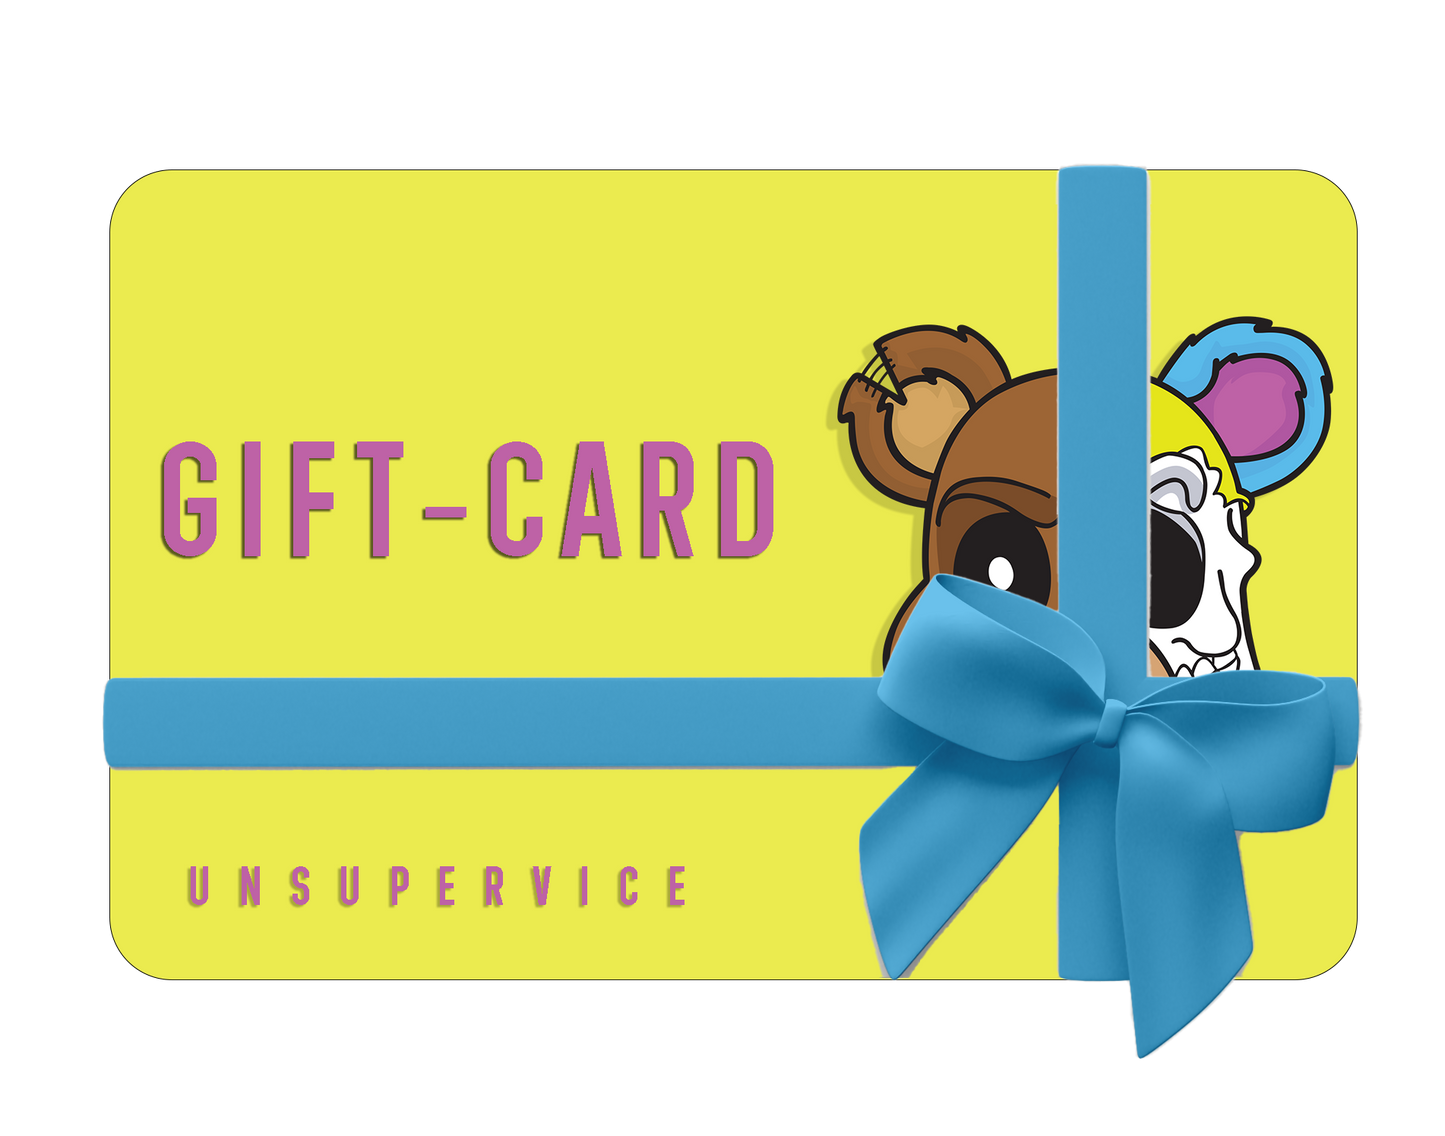 UNSUPERVICE GIFT-CARD